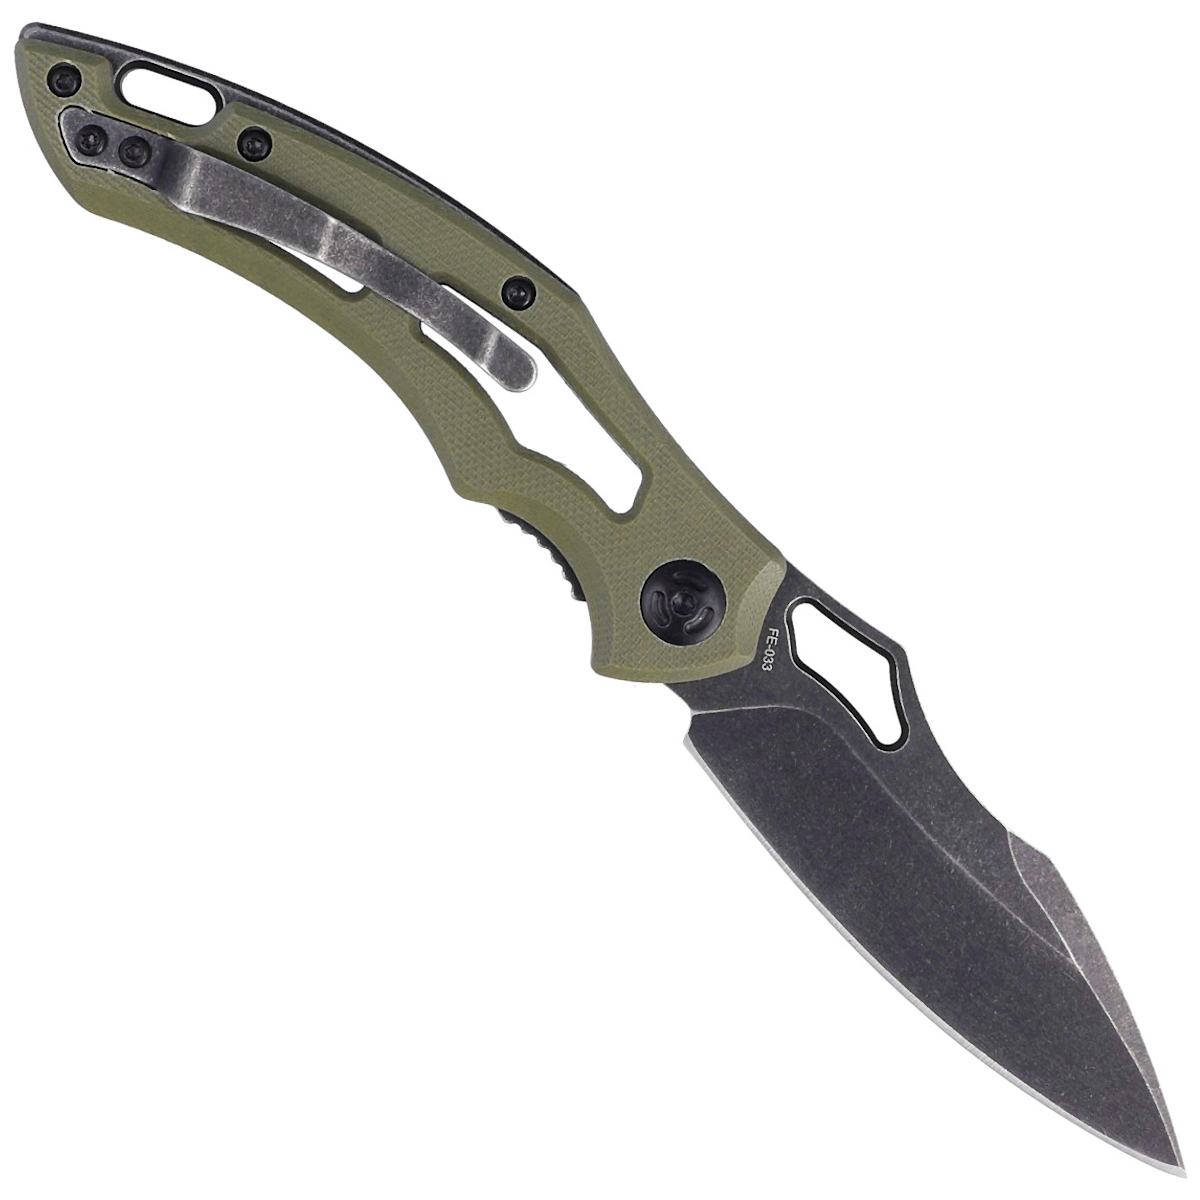 FoxEdge Sparrow OD Green G10, Stone Washed PVD by Denis Simonutti